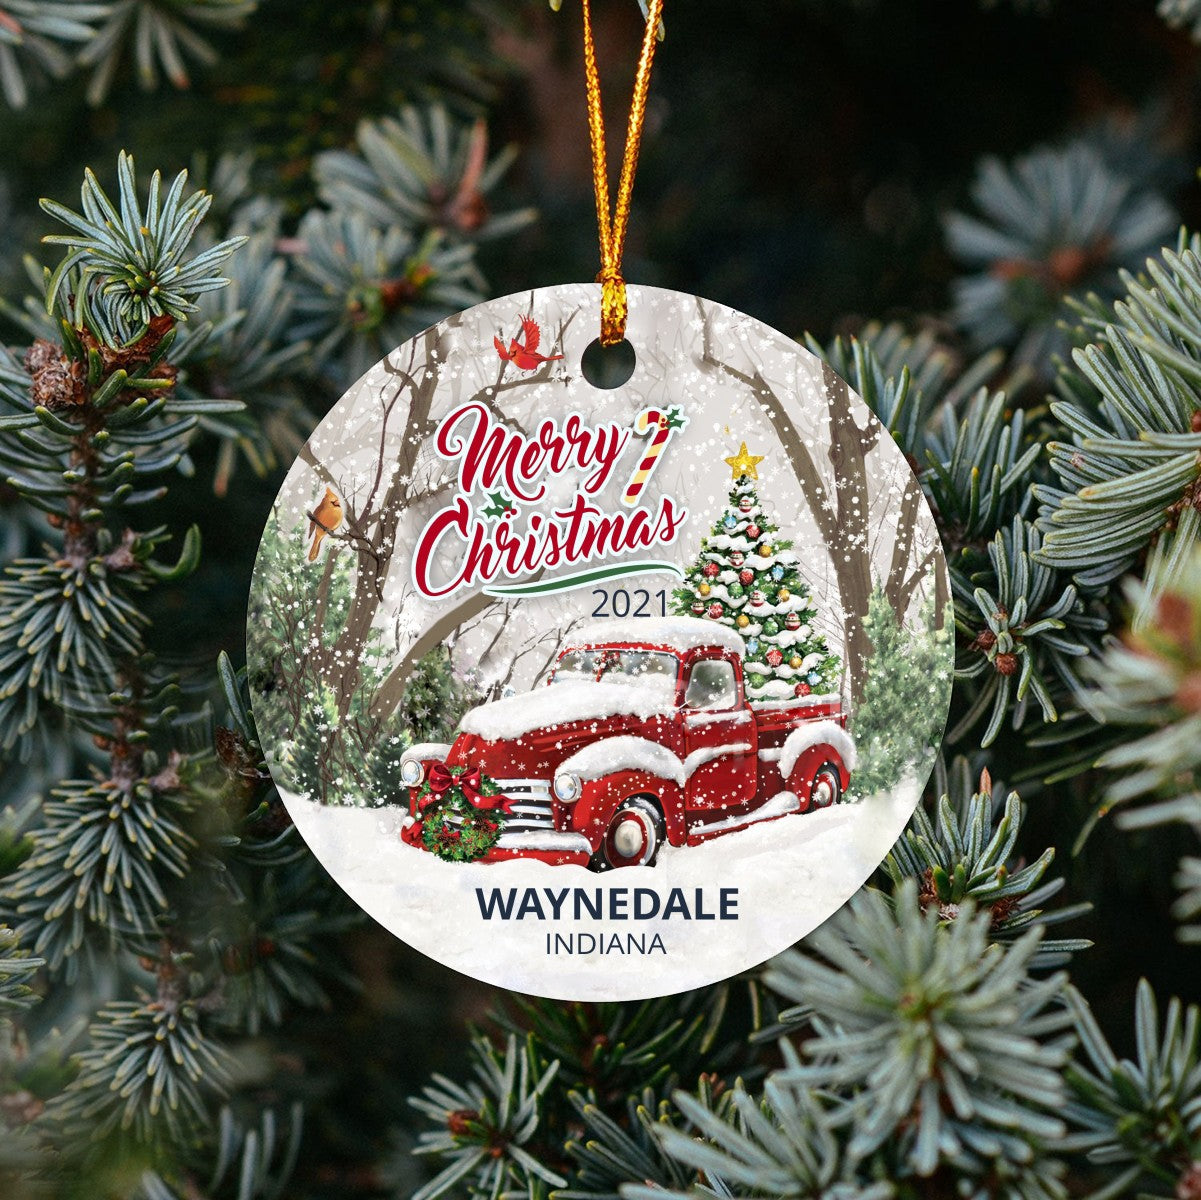 Christmas Tree Ornaments Waynedale - Ornament With Name City, State Waynedale Indiana IN Ornament - Red Truck Xmas Ornaments 3'' Plastic Gift For Family, Friend And Housewarming